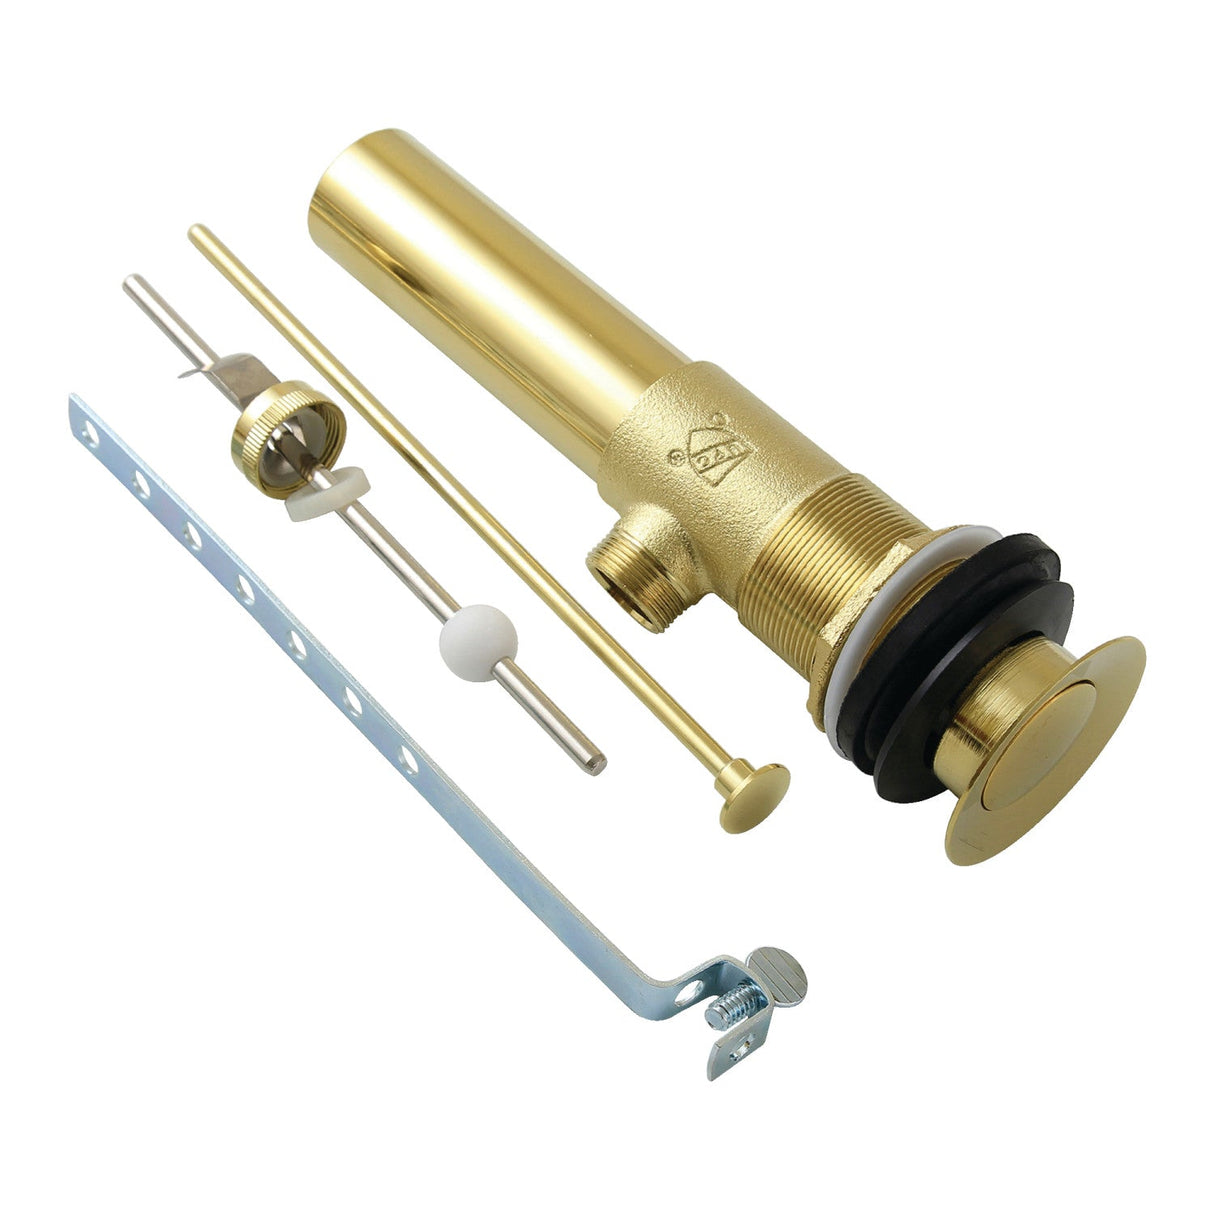 Made To Match KB1112 Brass Pop-Up Bathroom Sink Drain with Overflow, 22 Gauge, Polished Brass